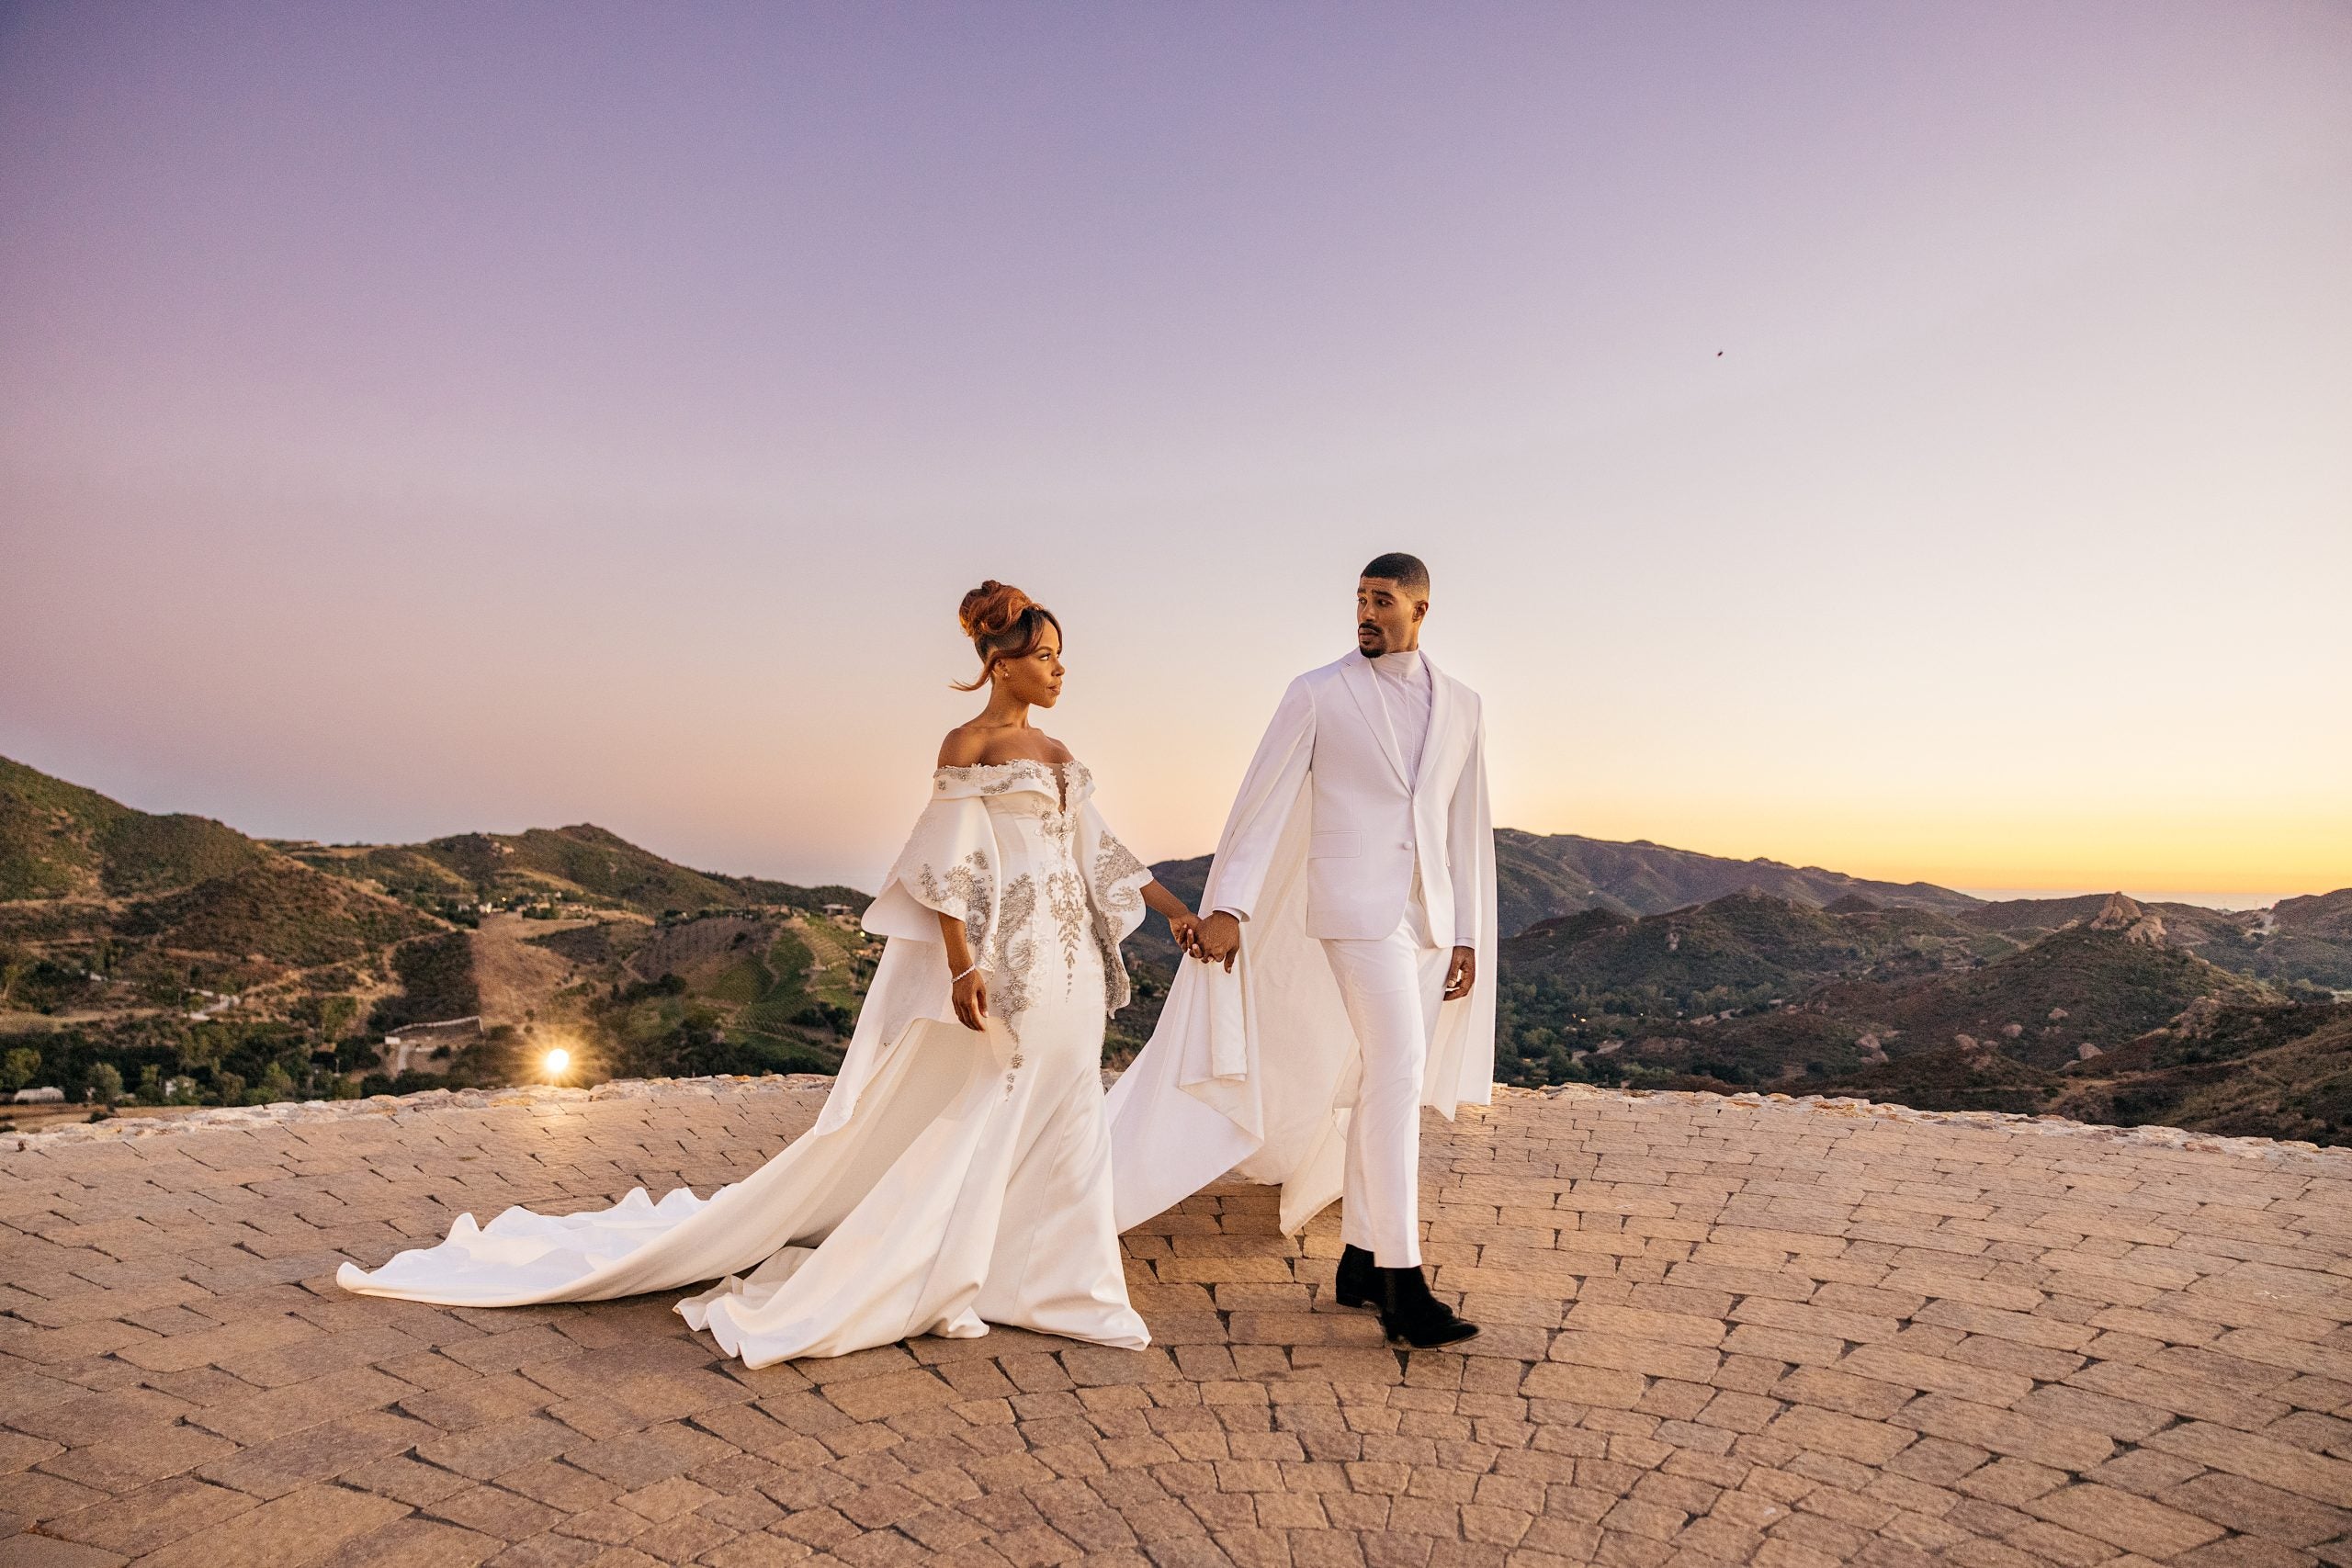 Exclusive: See BET Stars KJ Smith And Skyh Black’s Gorgeous Engagement Shoot